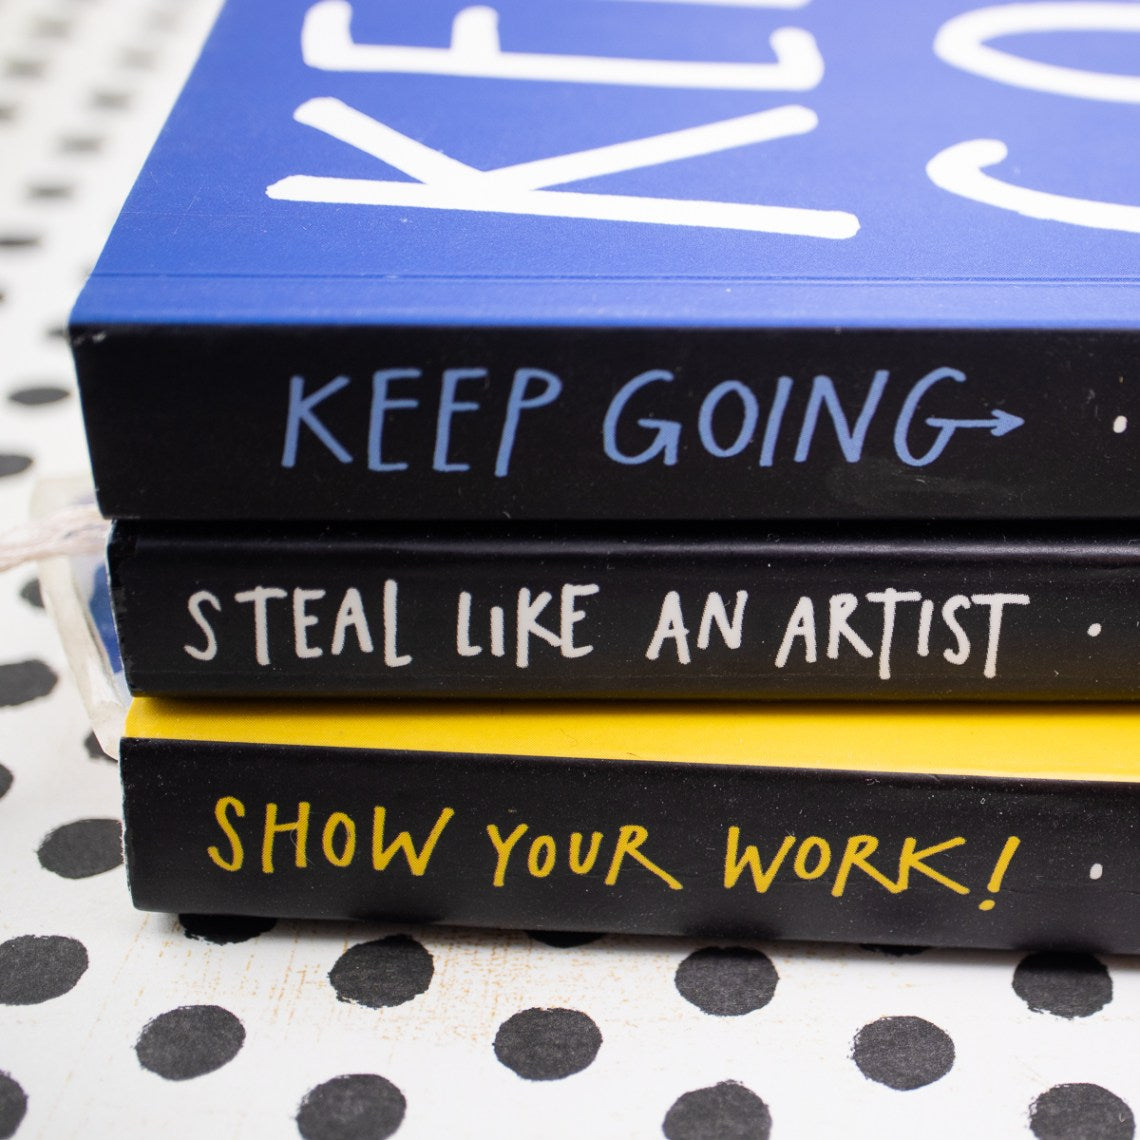 Keep Going  - 10 Ways to Stay Creative in Good Times and Bad